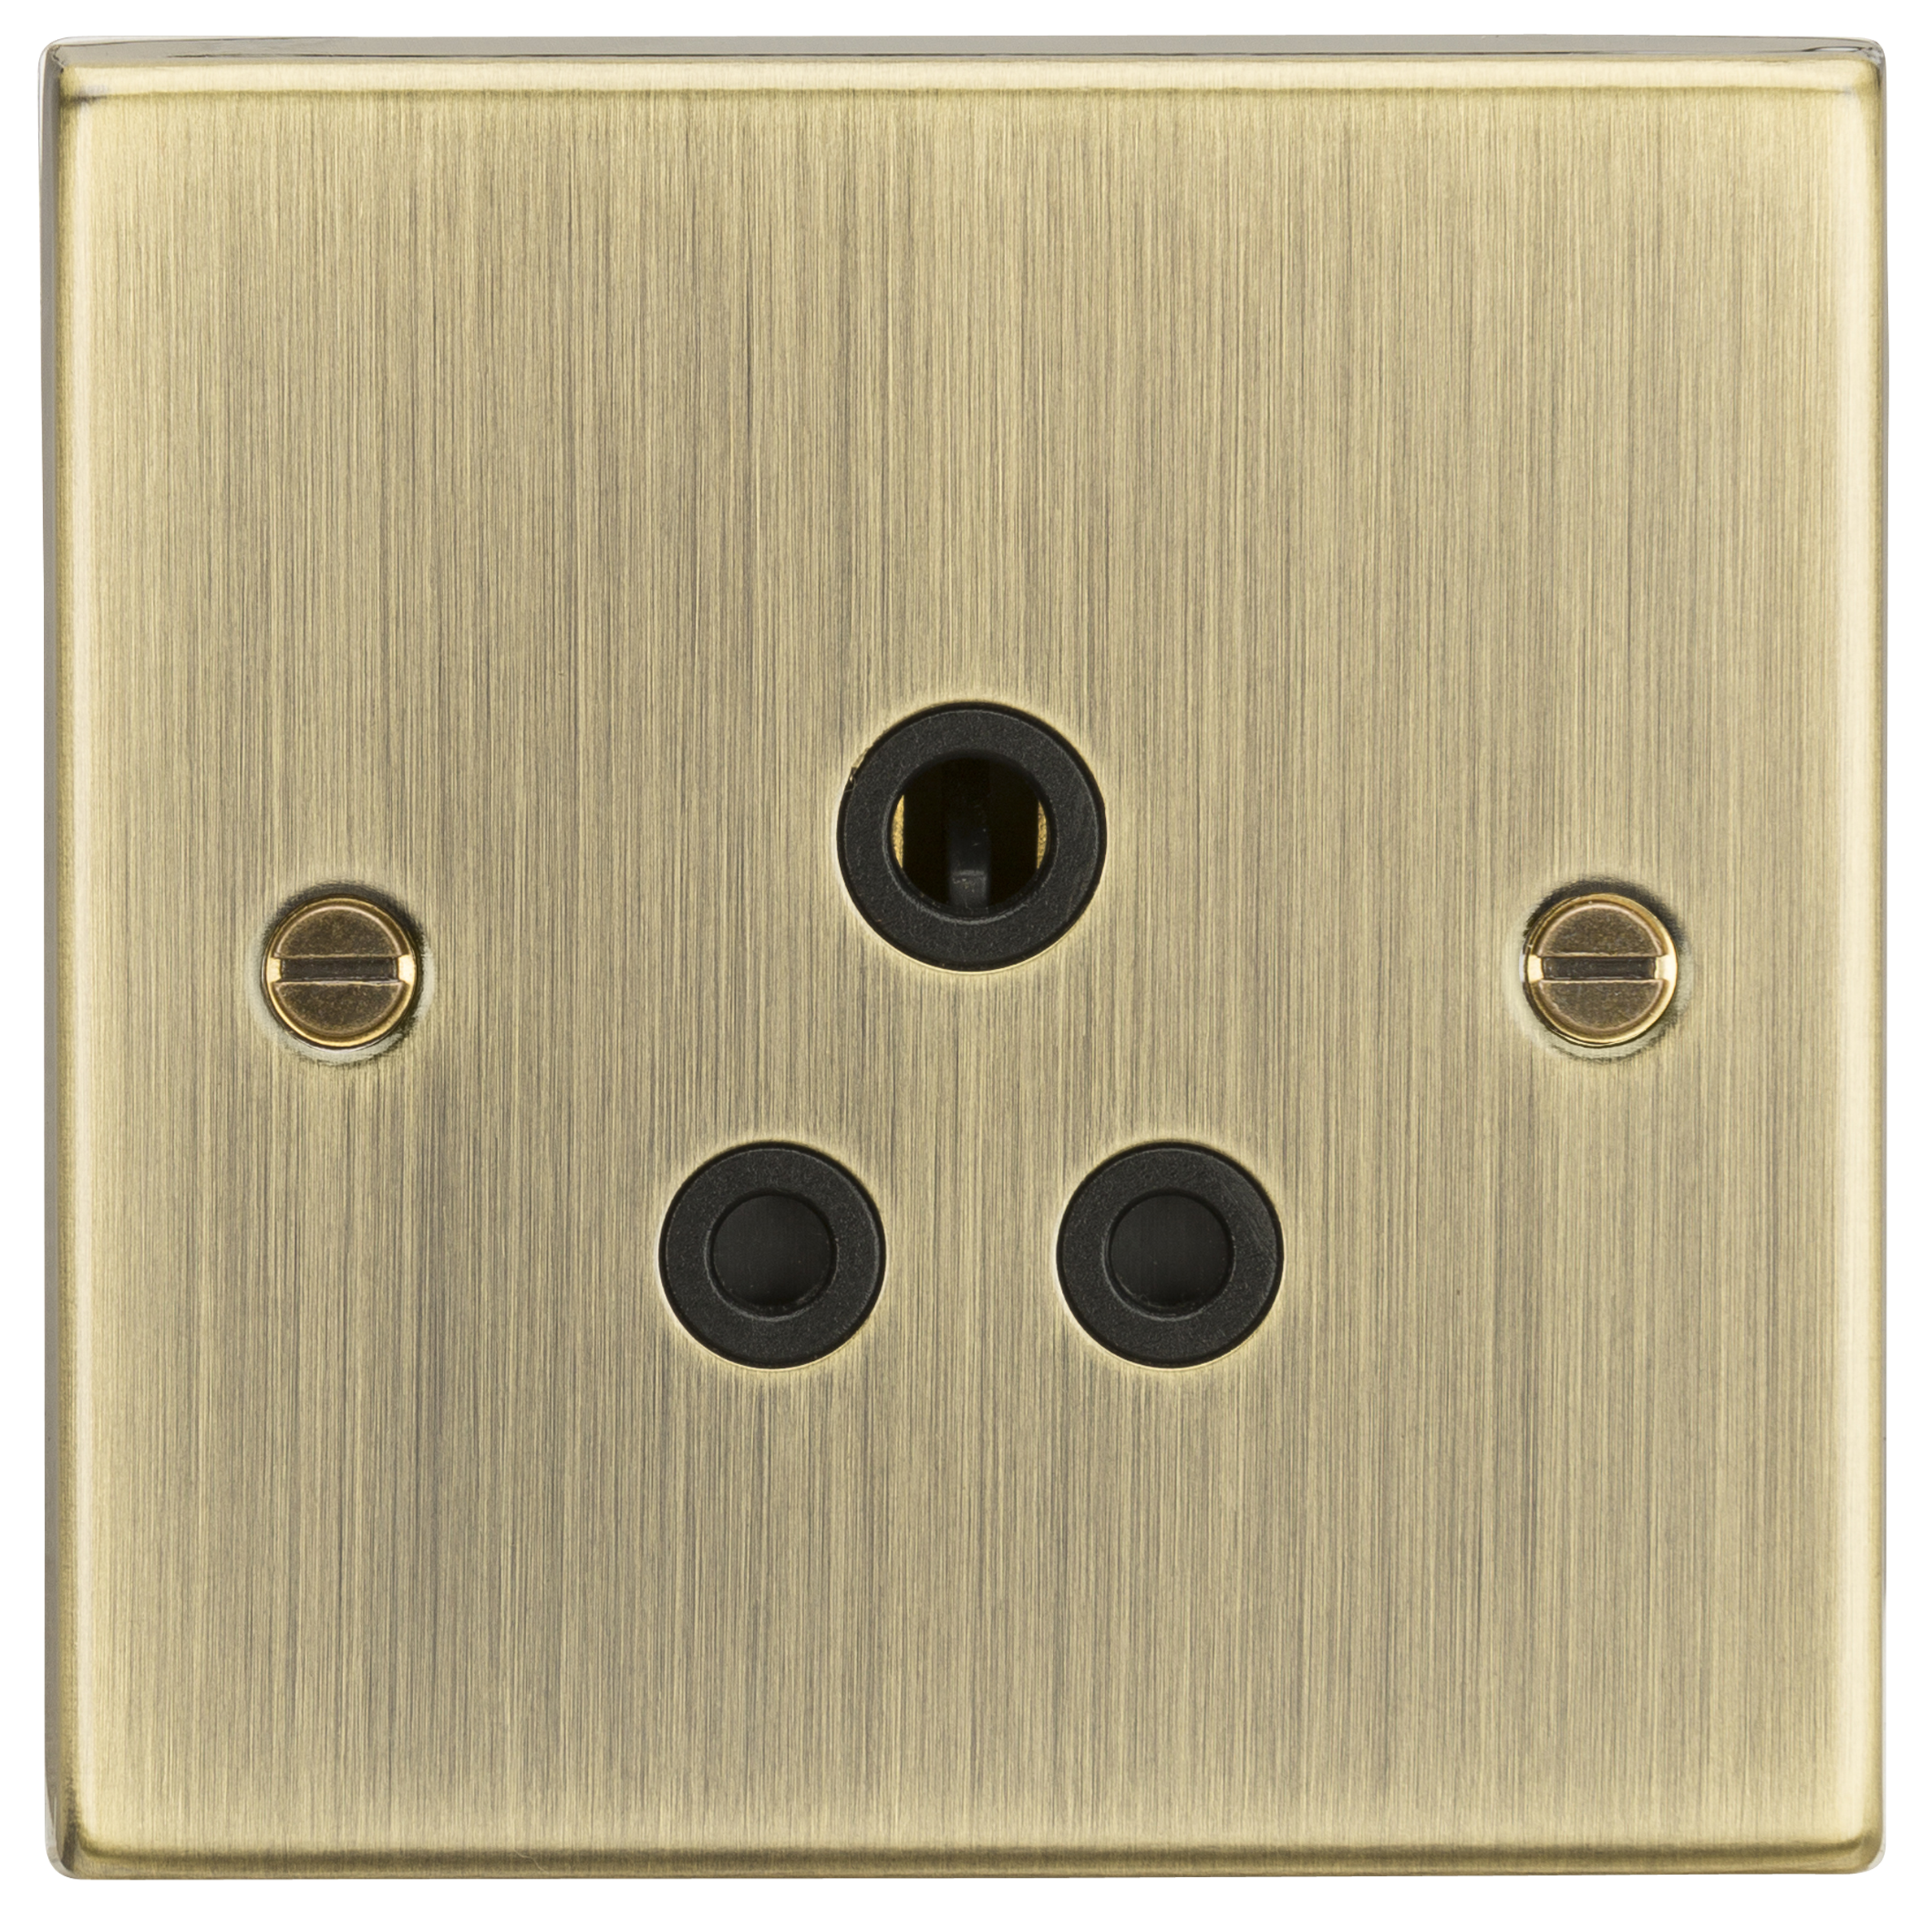 5A Unswitched Socket - Square Edge Antique Brass Finish With Black Insert - CS5AAB 